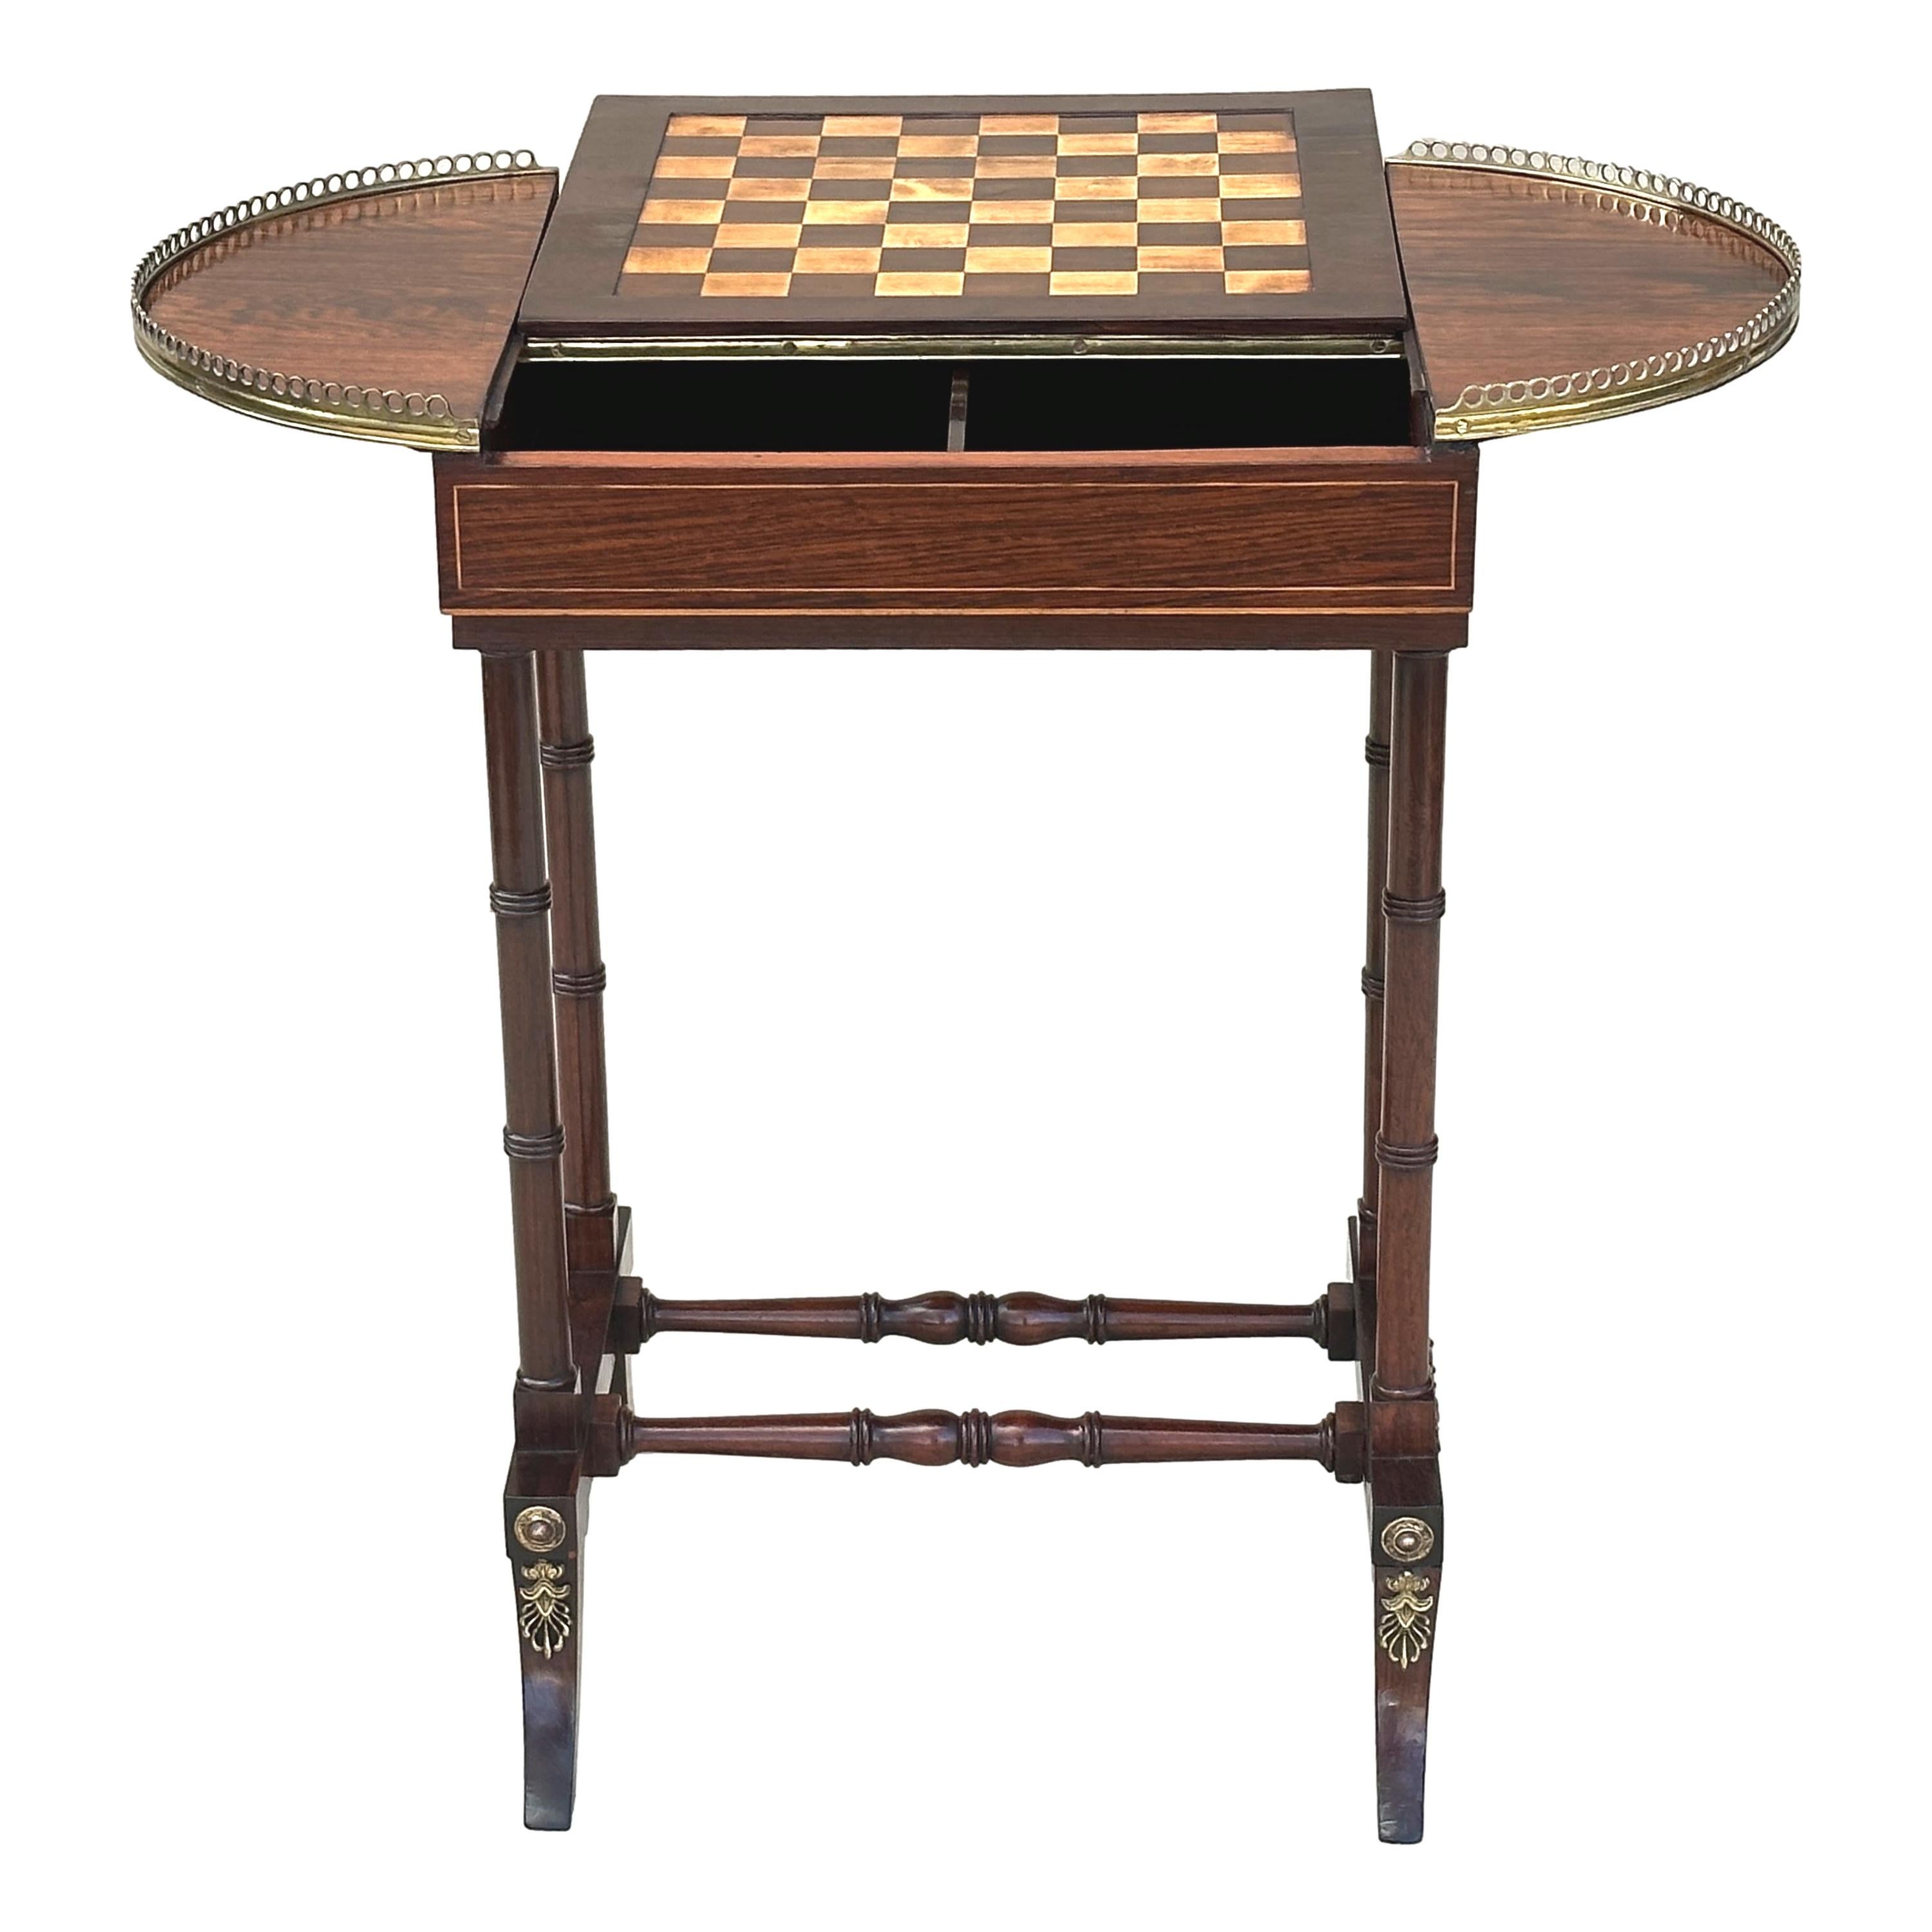 A Superb Quality Regency Period Rosewood And Brass games table, With Chess Board Inlaid, Reversible, Removable Top Enclosing Backgammon Board, Flanked By Curved Ends With Original Brass Gallery, Raised On Elegant Turned Double End Supports